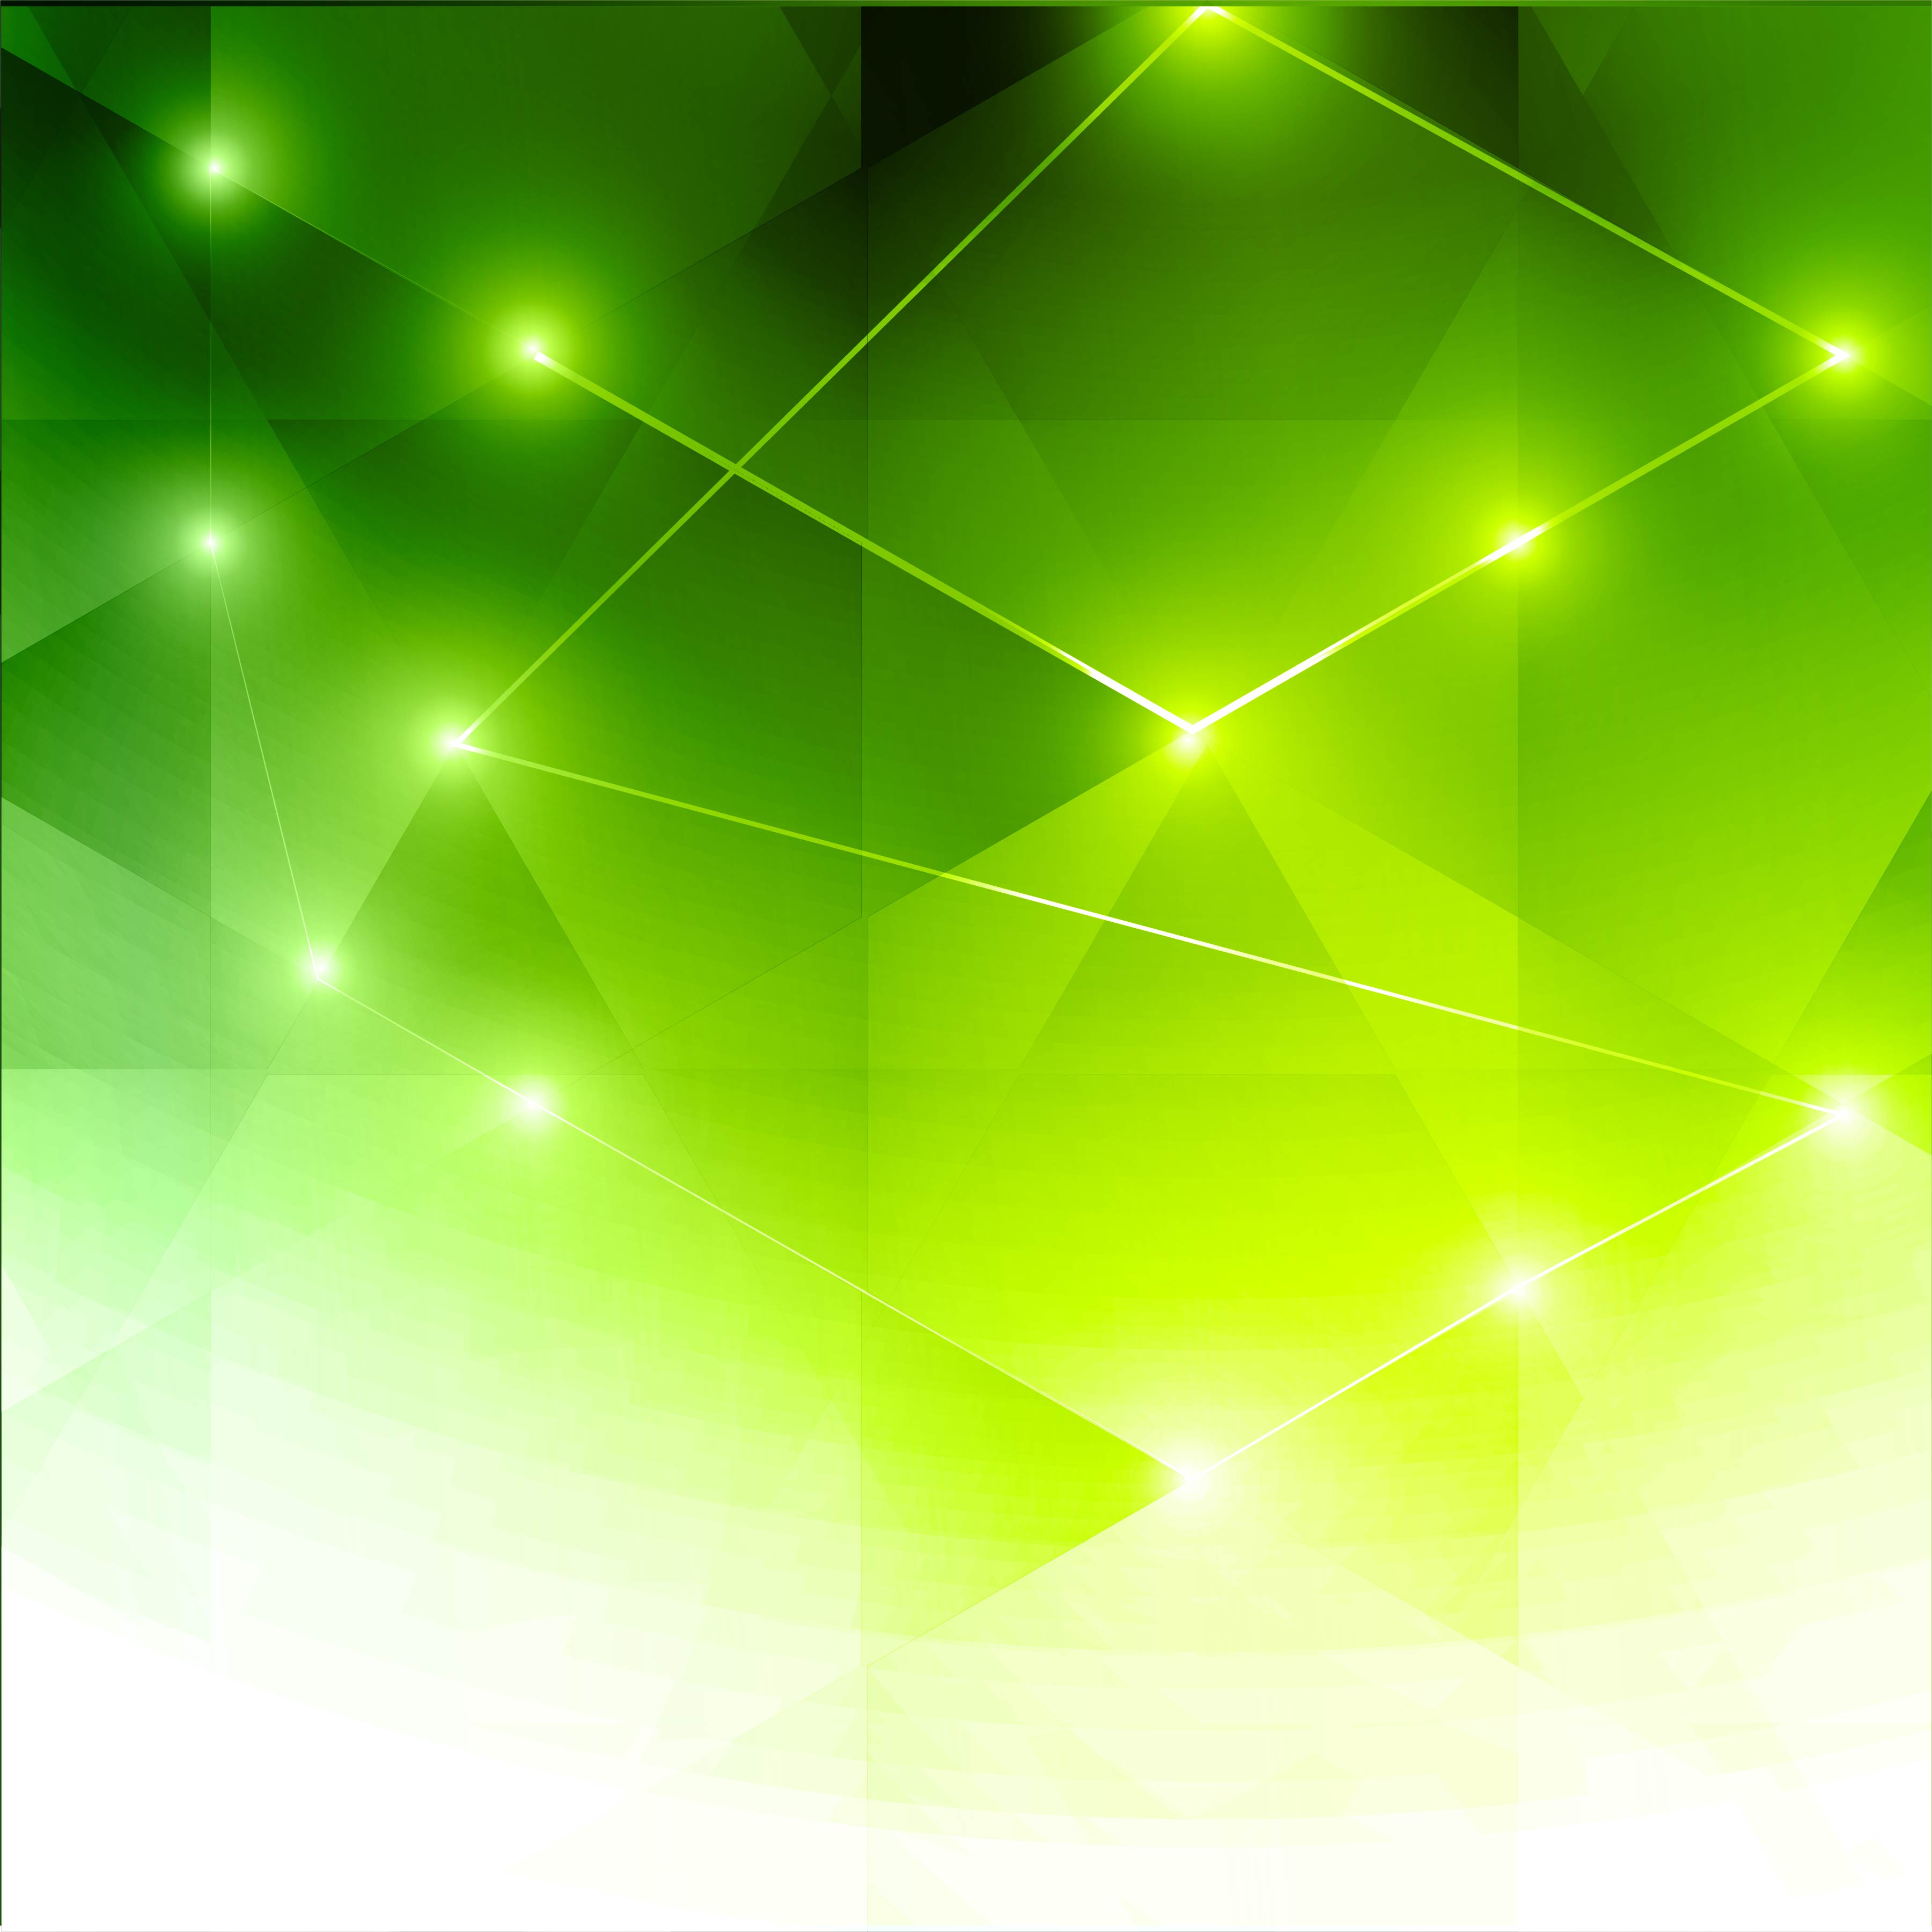 Clean Gradient Green Abstract Background With Shiny Shape Vector